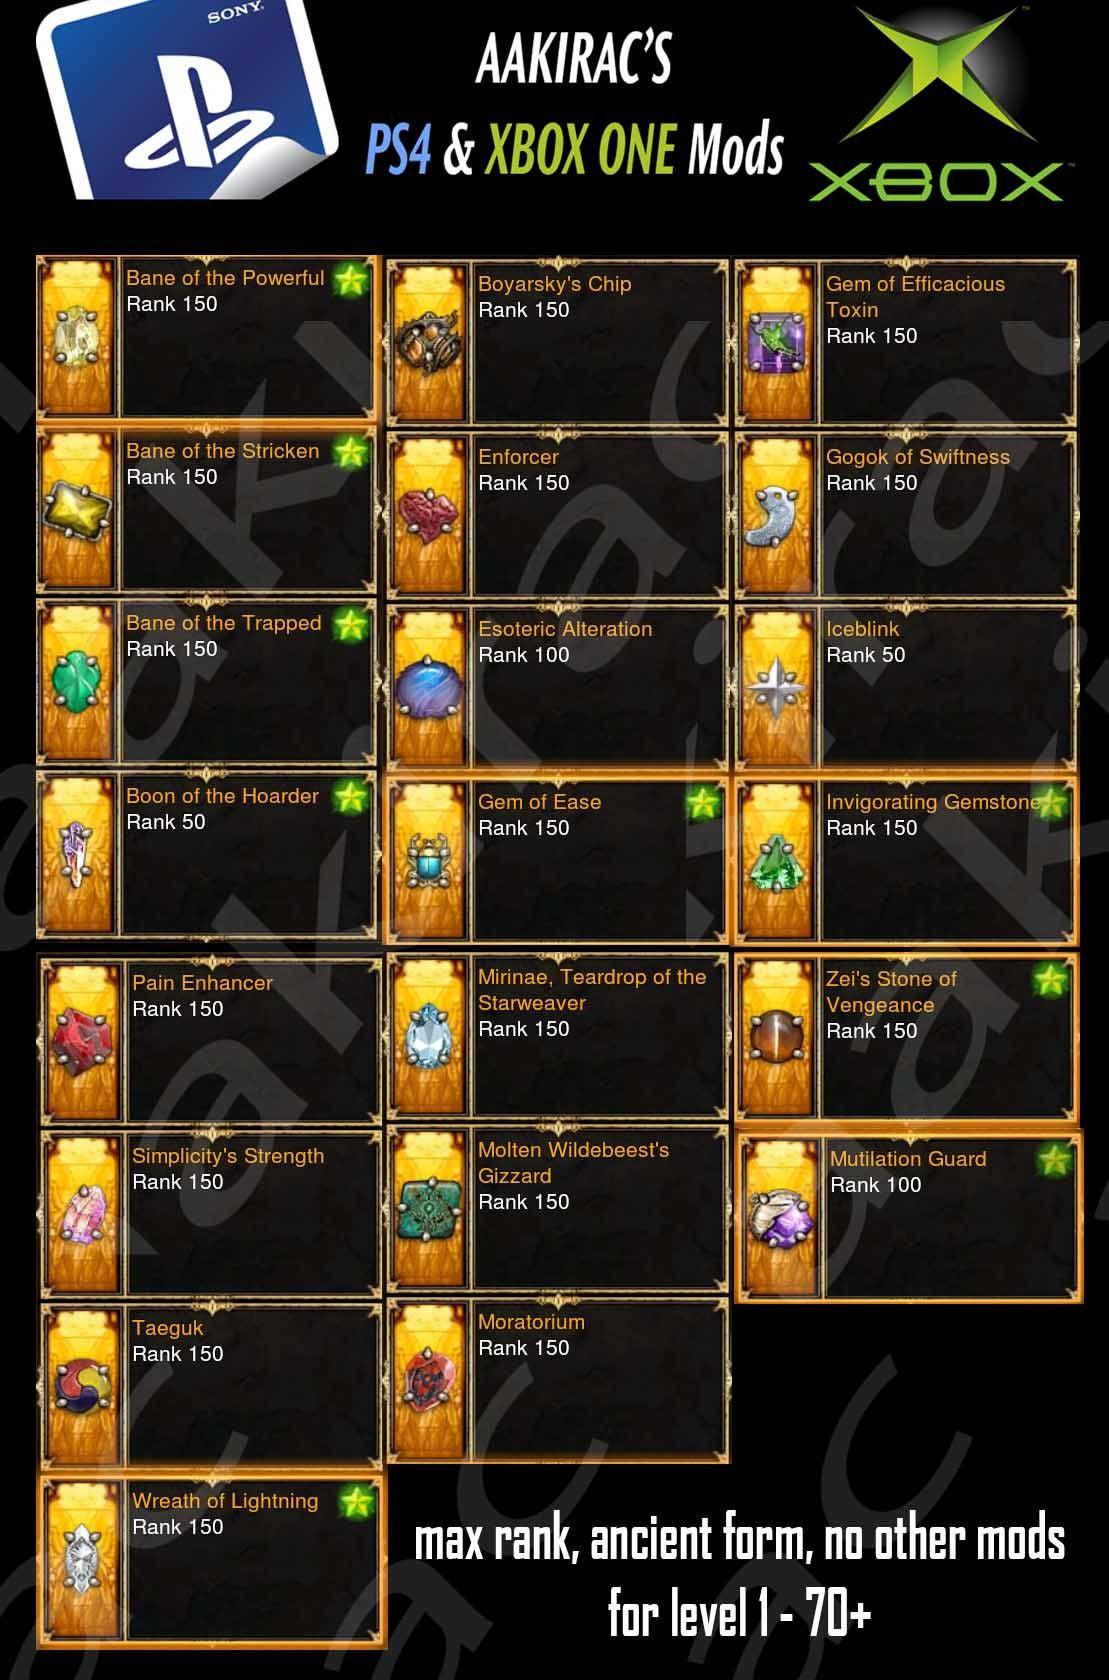 21x Legendary Gems (Works at Level 1 , Ancient, Max Rank, Unmodded) Diablo 3 Mods ROS Seasonal and Non Seasonal Save Mod - Modded Items and Gear - Hacks - Cheats - Trainers for Playstation 4 - Playstation 5 - Nintendo Switch - Xbox One